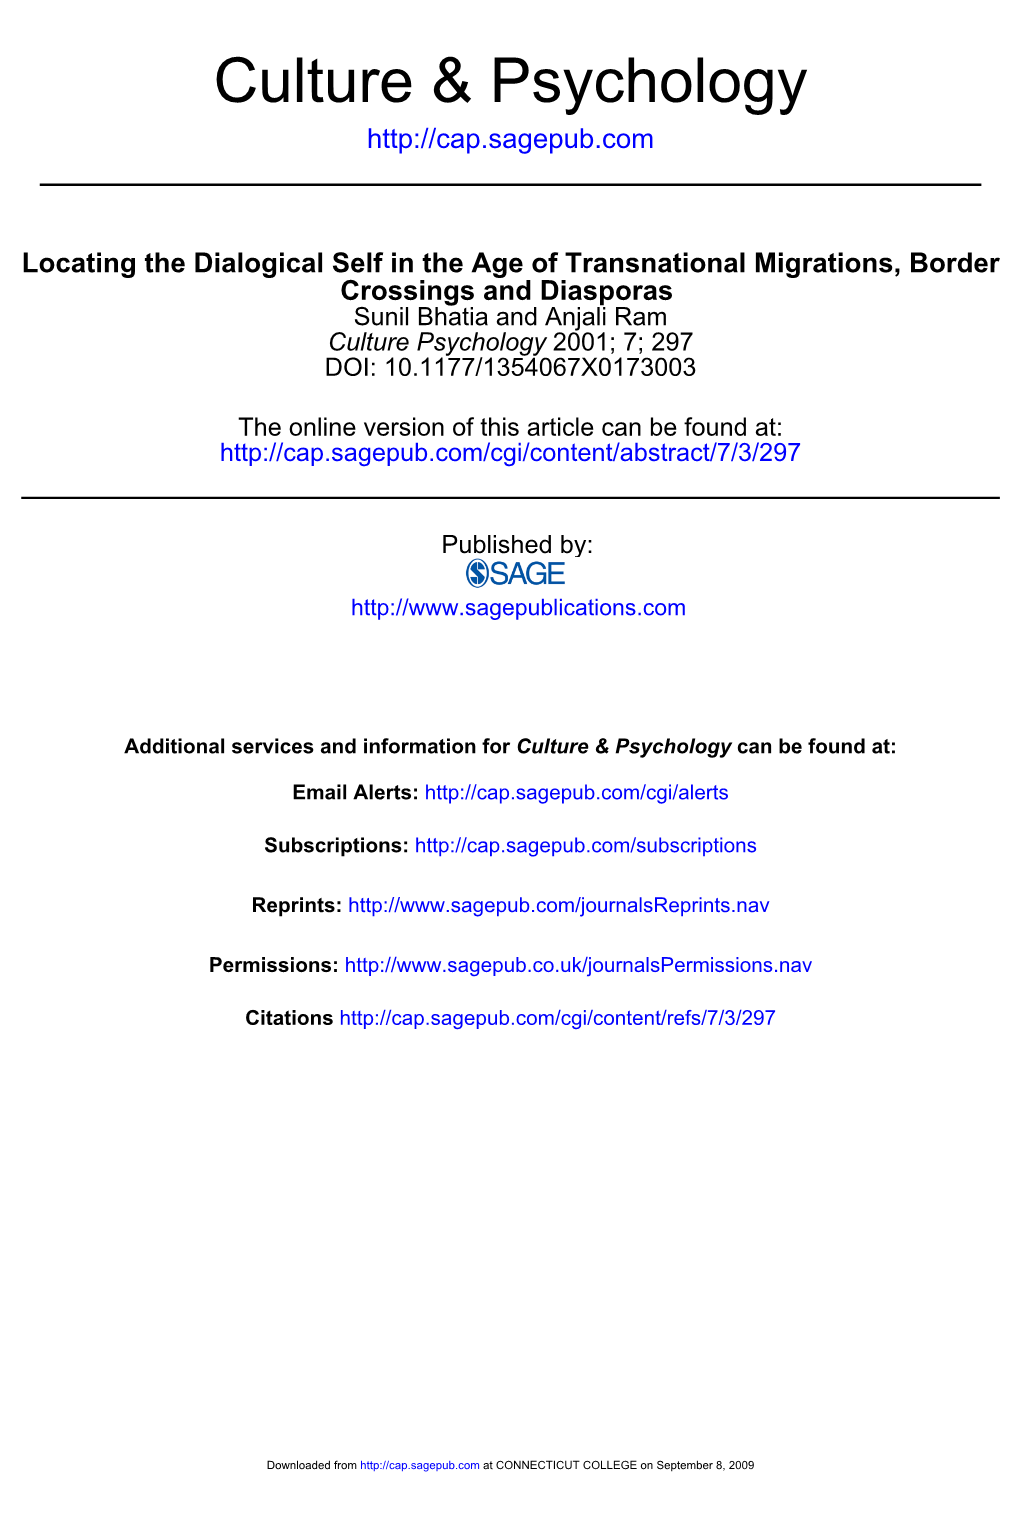 Bhati and Ram Locating the Dialogical Self.Pdf